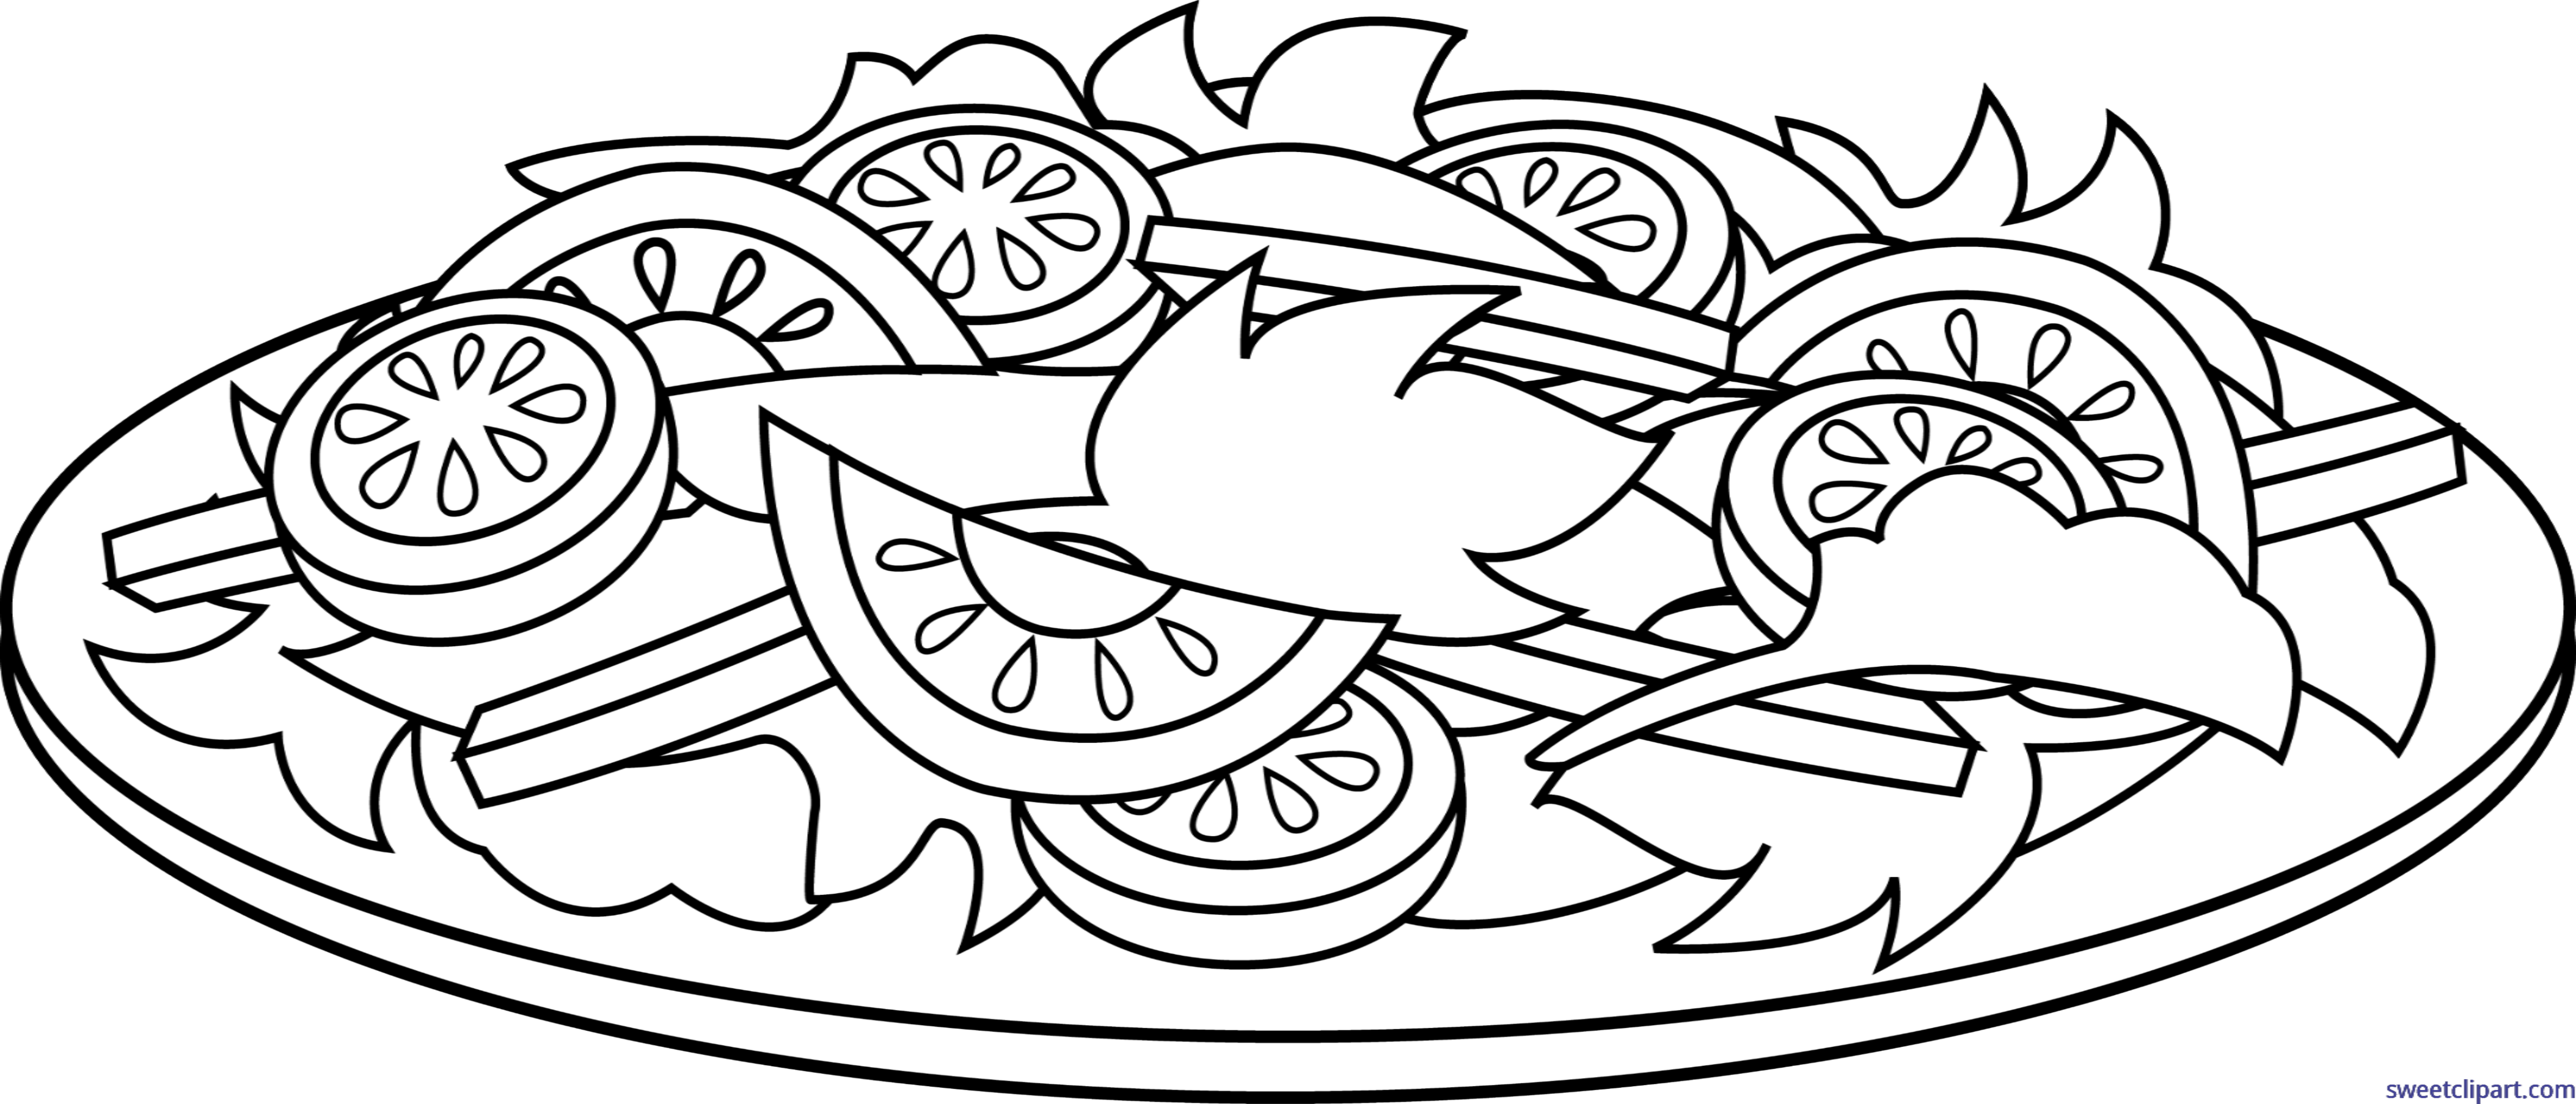 toucan clipart black and white